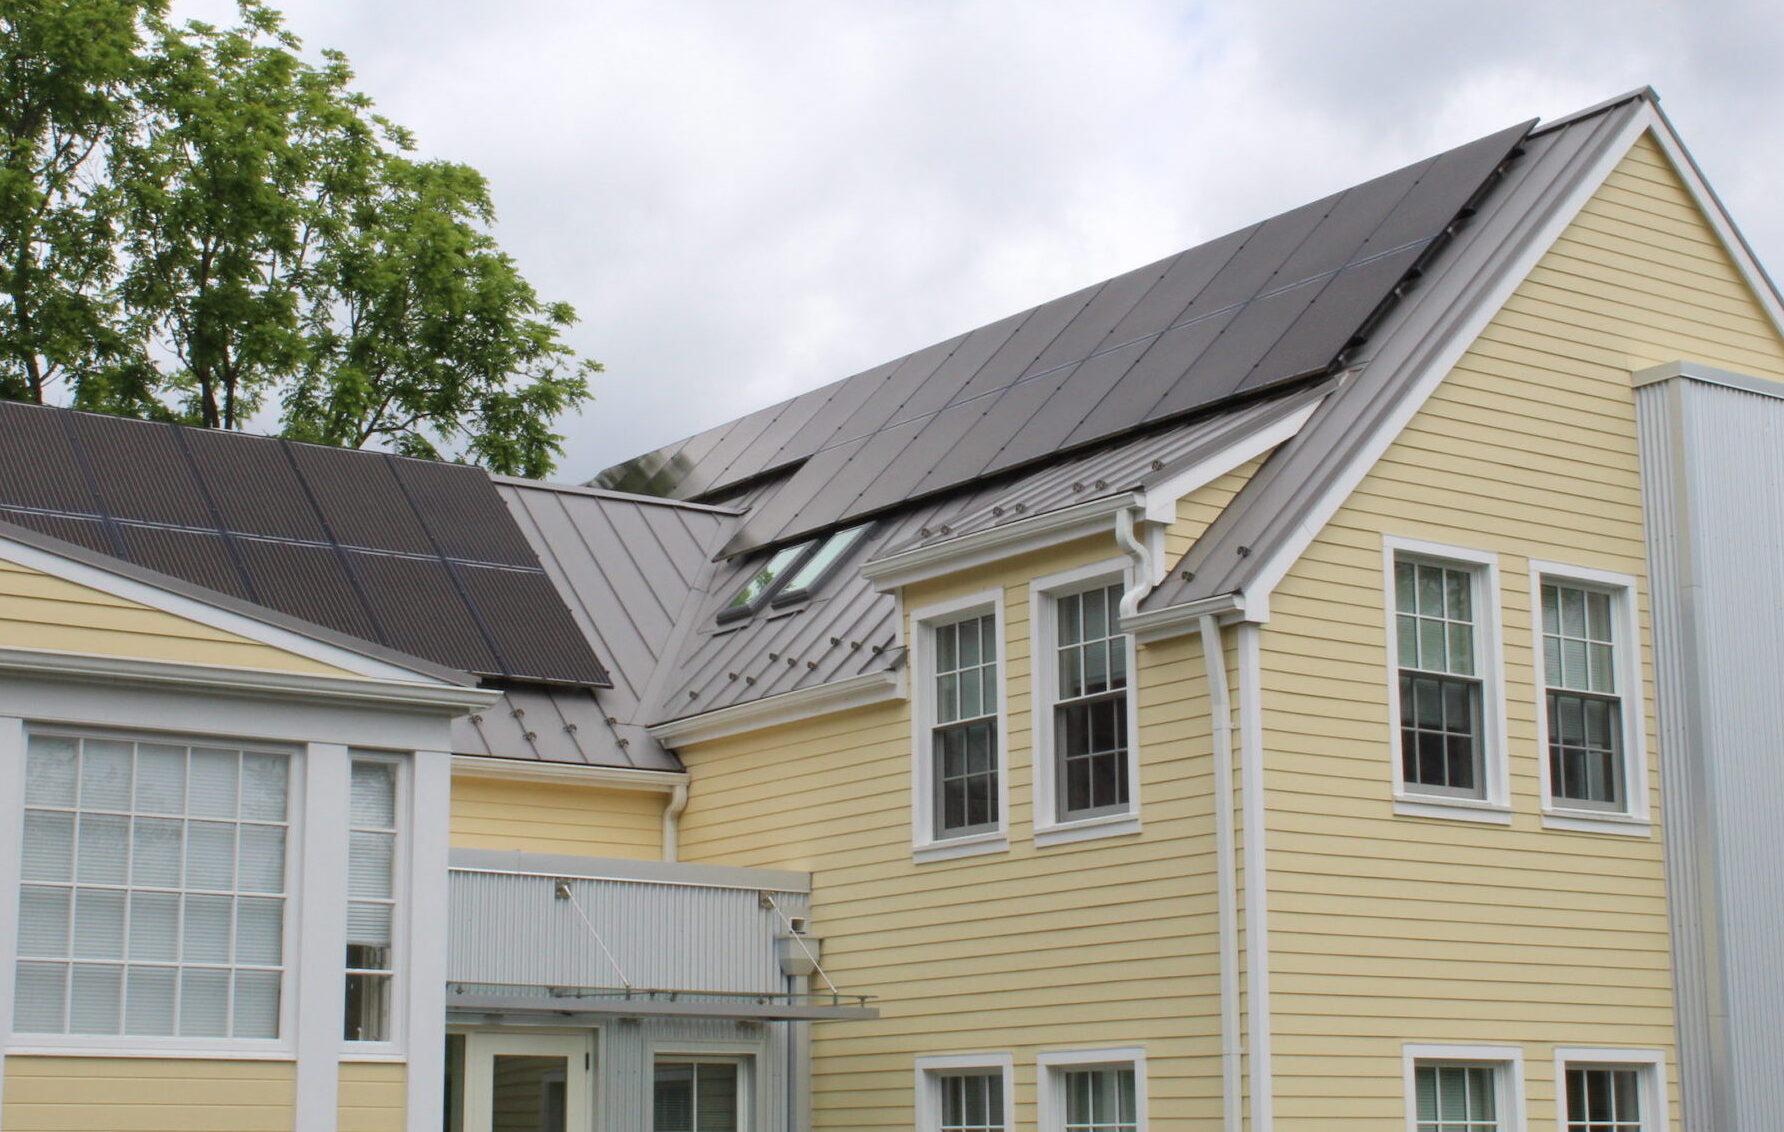 Through shared solar, low-to-moderate income Virginians will be able to greater participate in solar programs and offset all or a majority of the costs of a solar energy system.